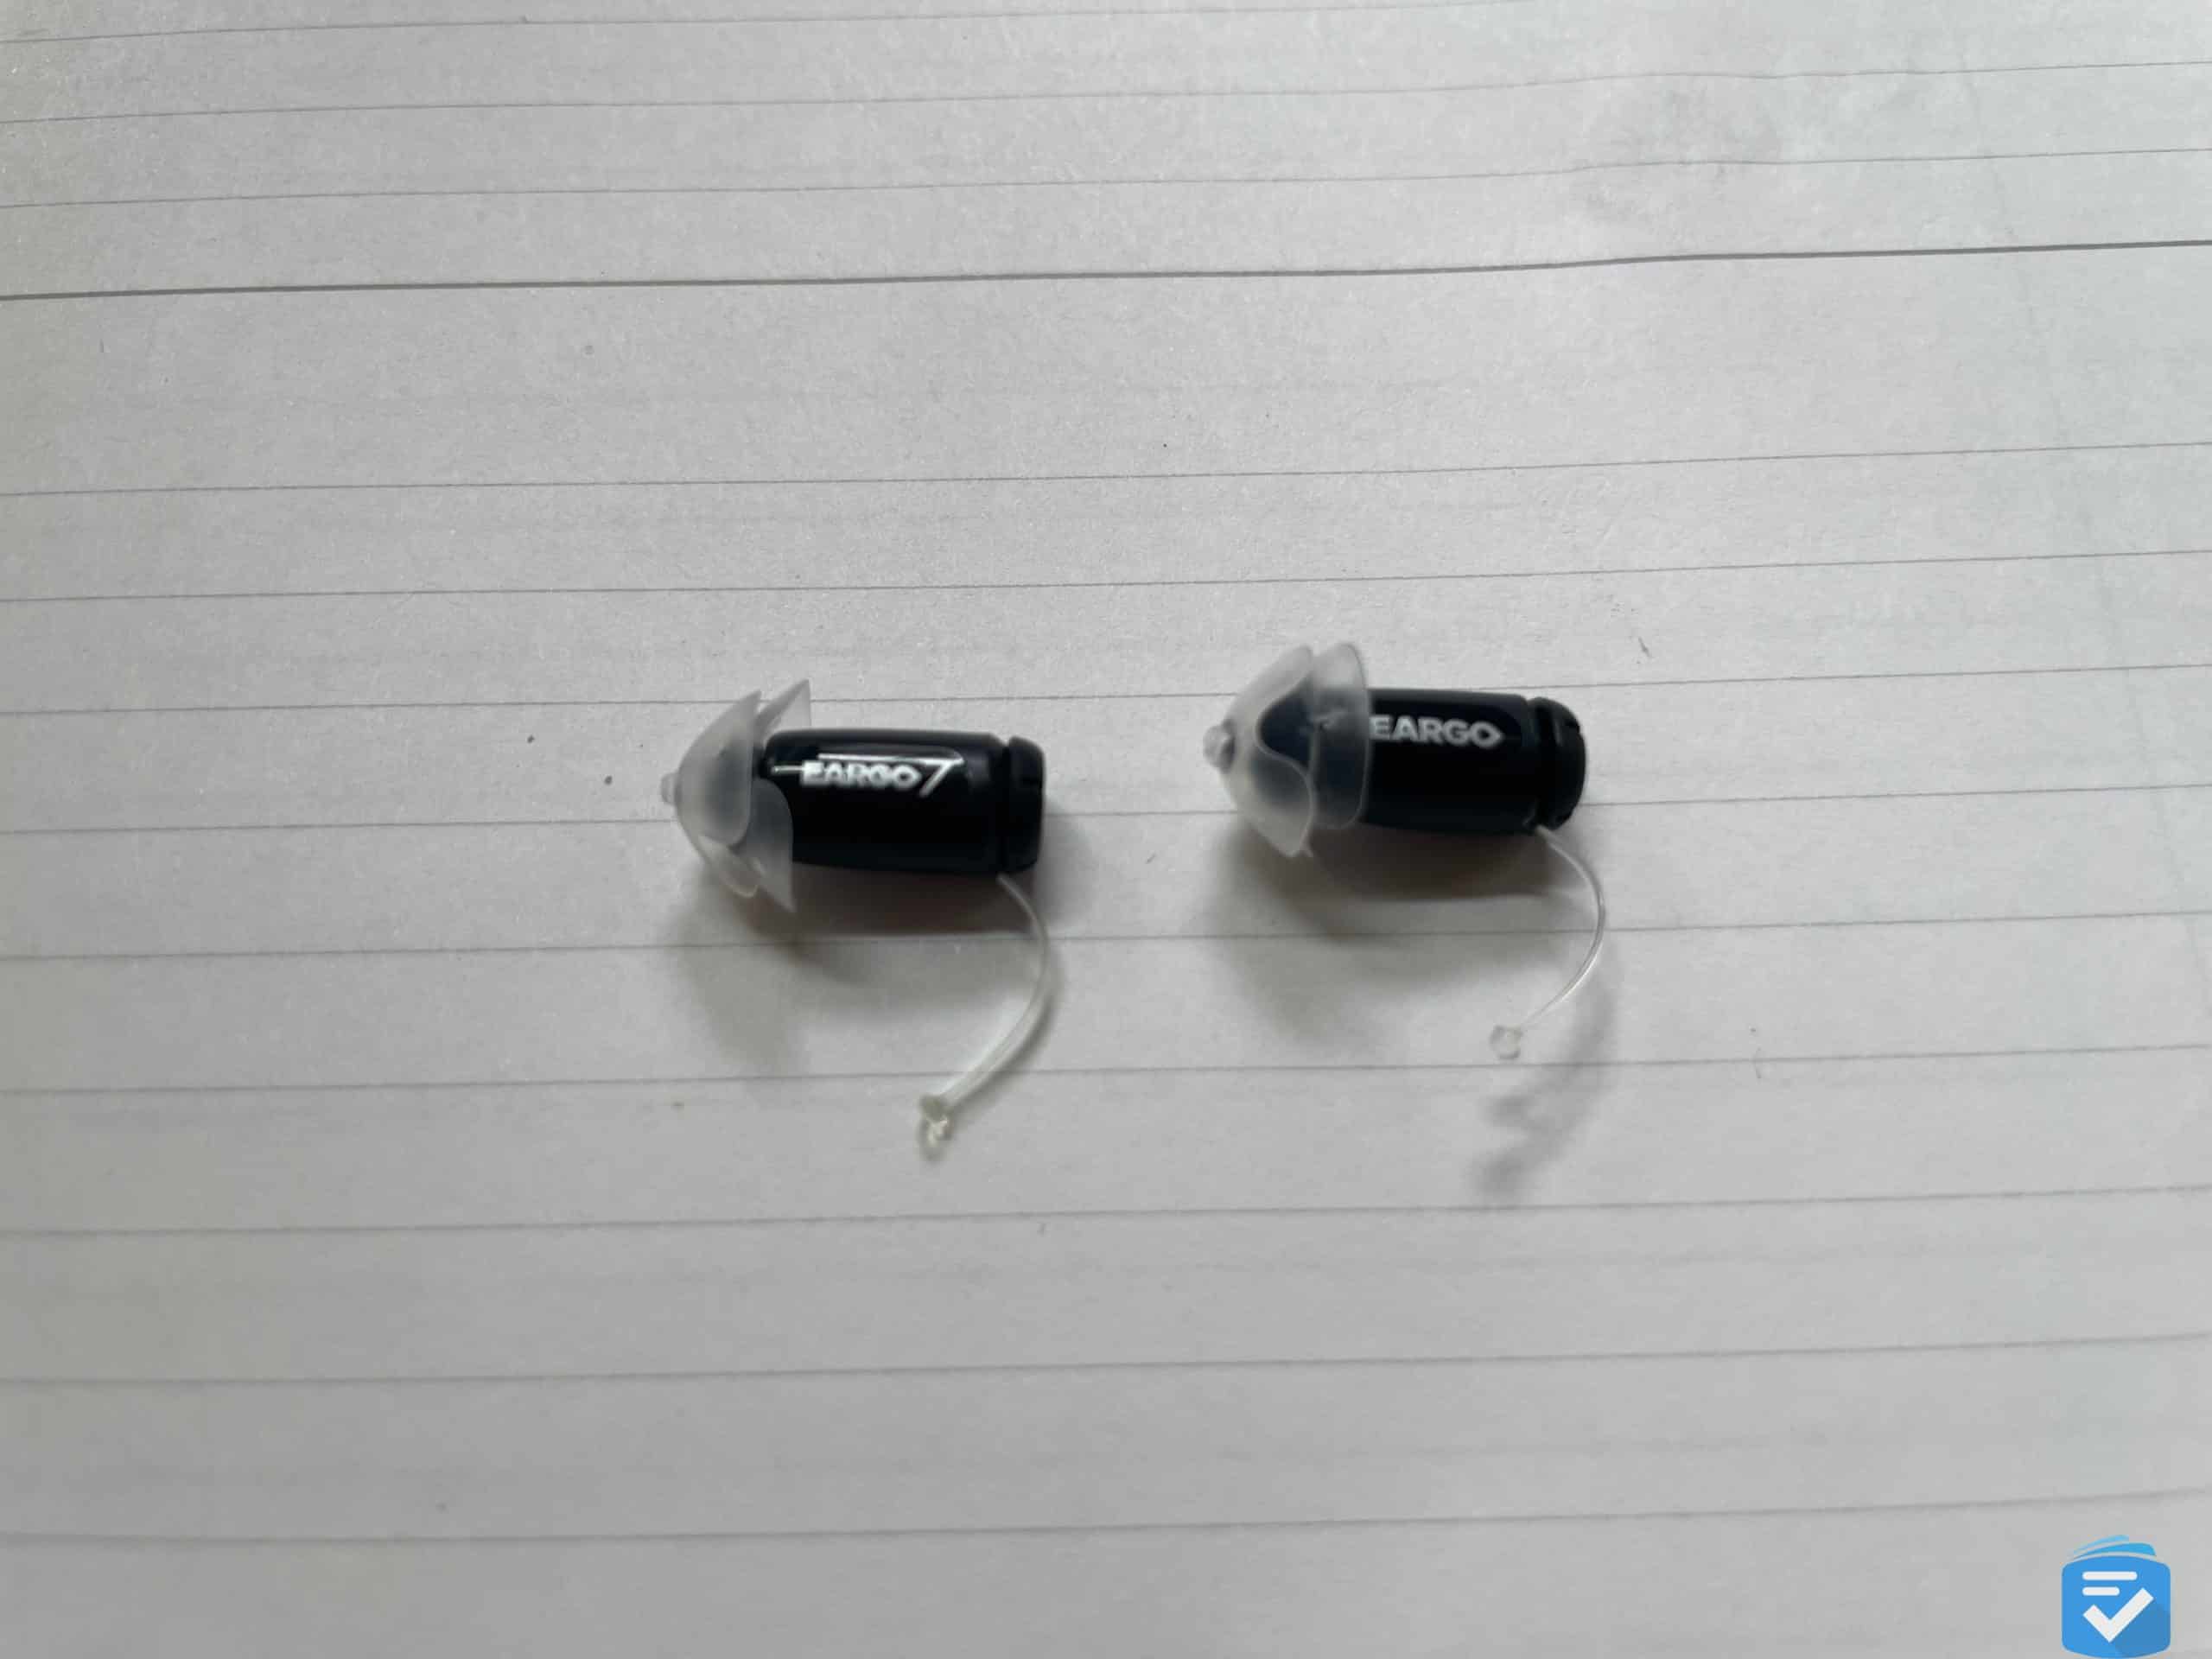 In terms of appearance, Eargo 7 hearing aids (left) look nearly identical to the Eargo 6 (right).